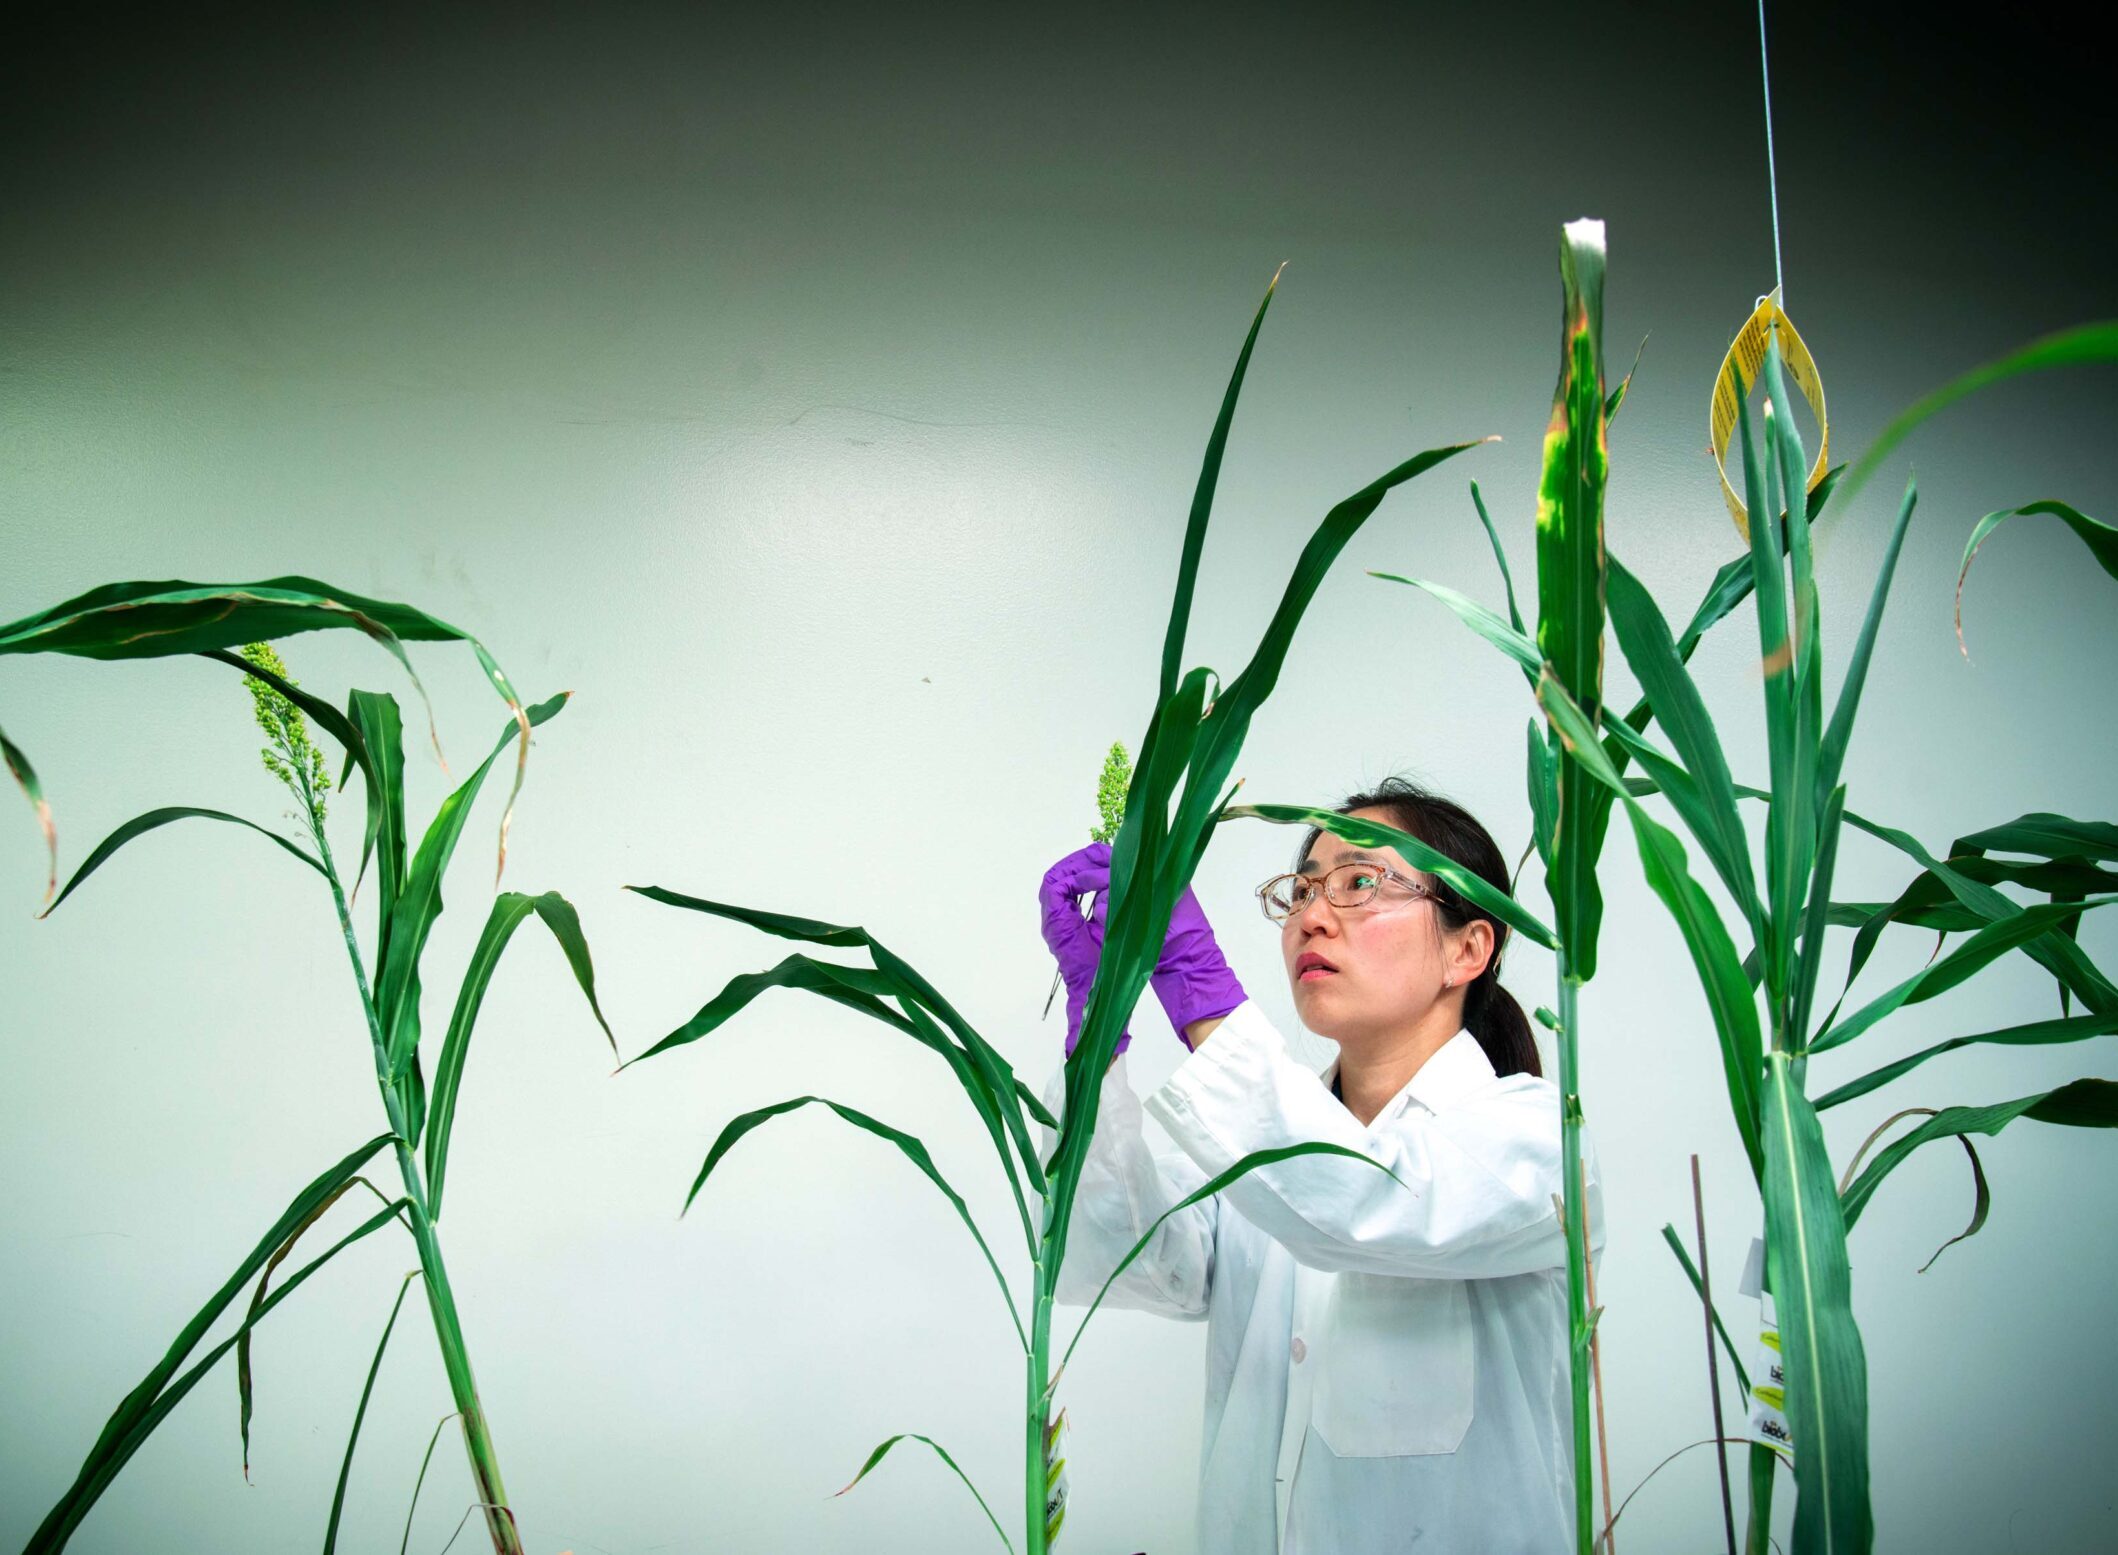 Dark-haired scientist in a lab inspecting tall corn-like plants.